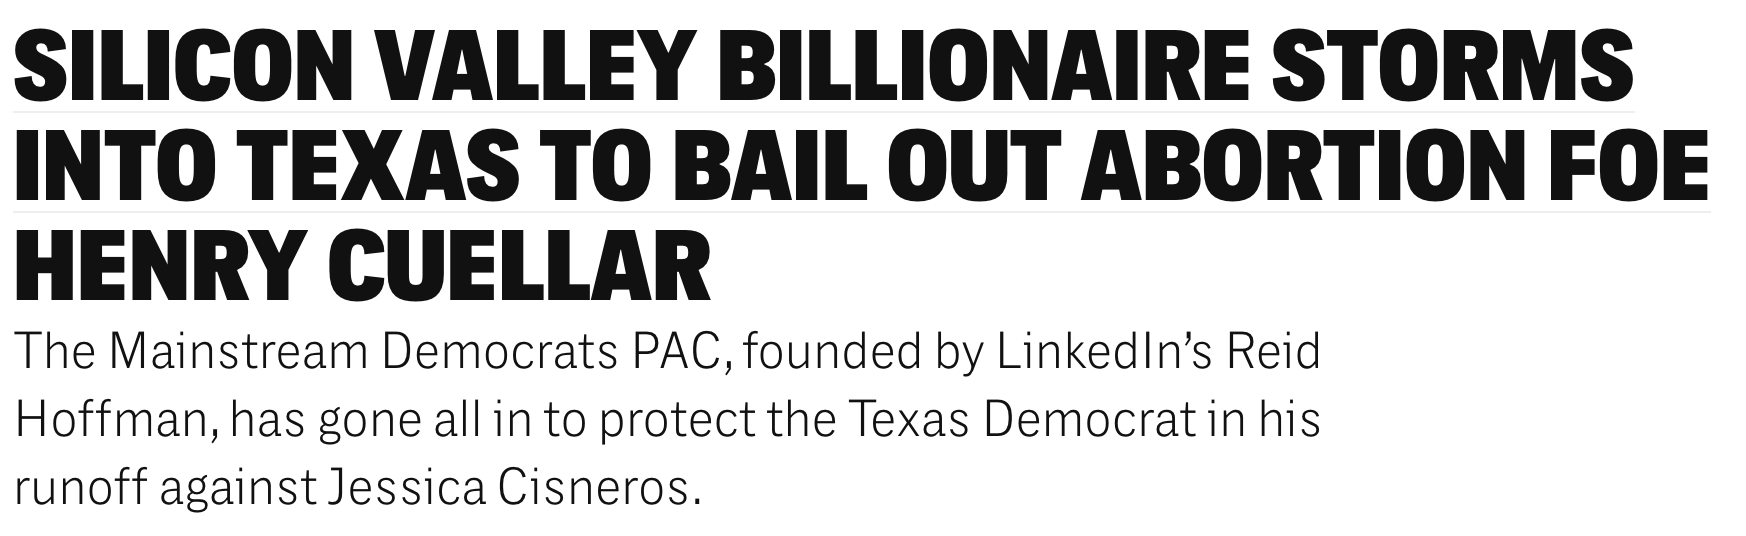 Intercept headline reads: Silicon Valley Billionaire Storms into Texas to Bail Out Abortion Foe Henry Cuellar. Subheadline reads: The Mainstream Democrats PAC, founded by LinkedIn’s Reid Hoffman, has gone all in to protect the Texas Democrat in his runoff against Jessica Cisneros.